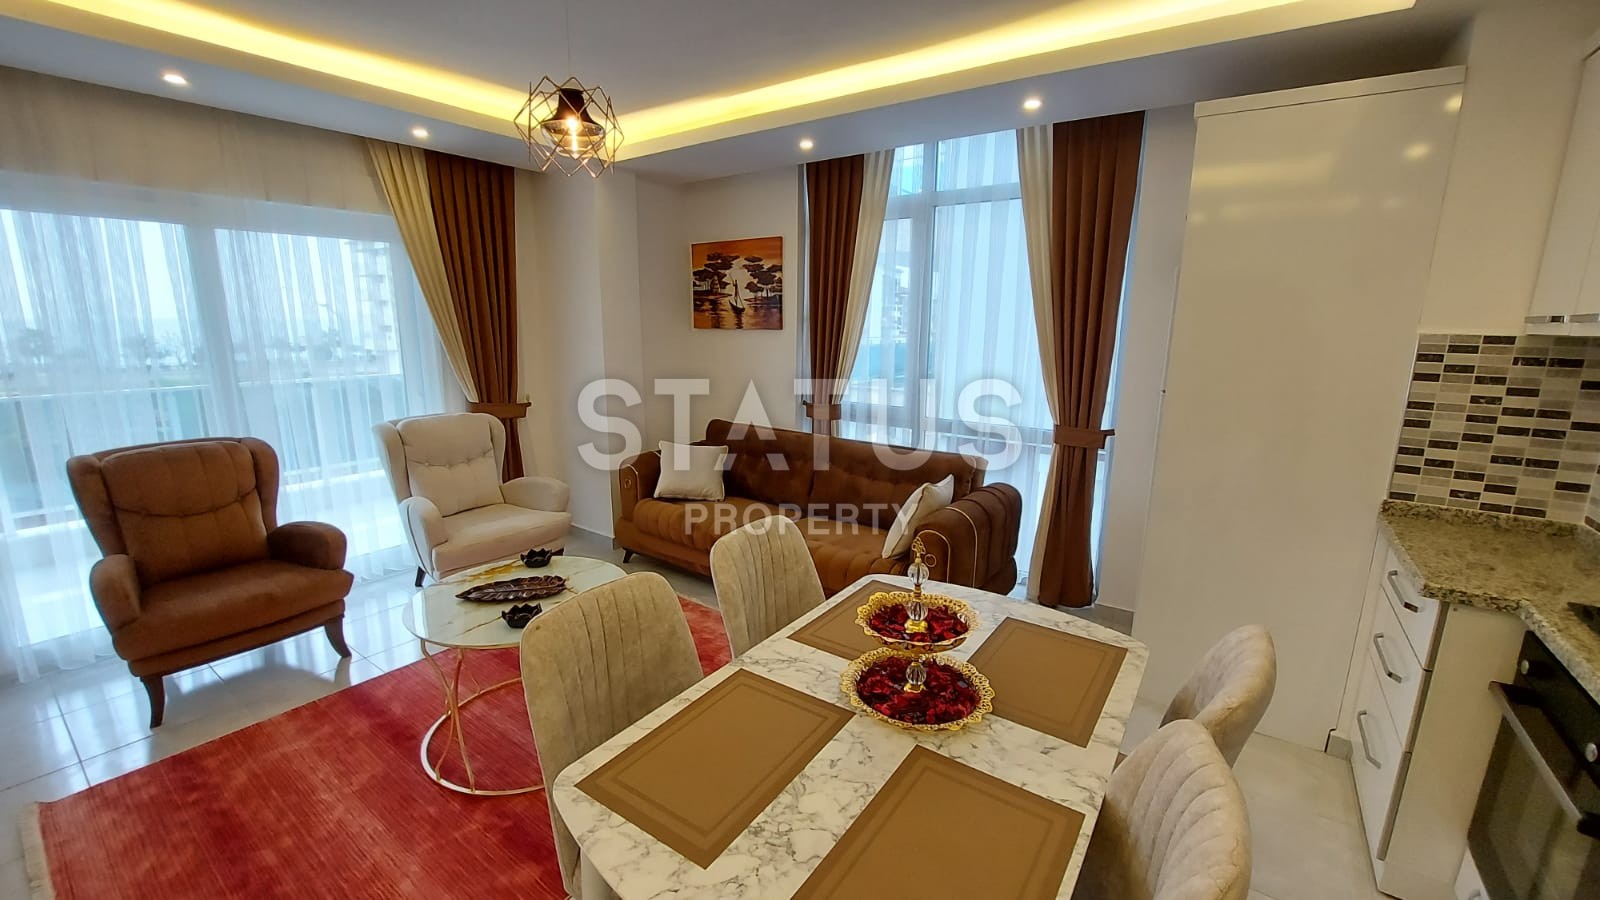 Furnished apartments 1+1, 150 meters from the embankment, 50 m2. Kestel, Alanya. фото 1